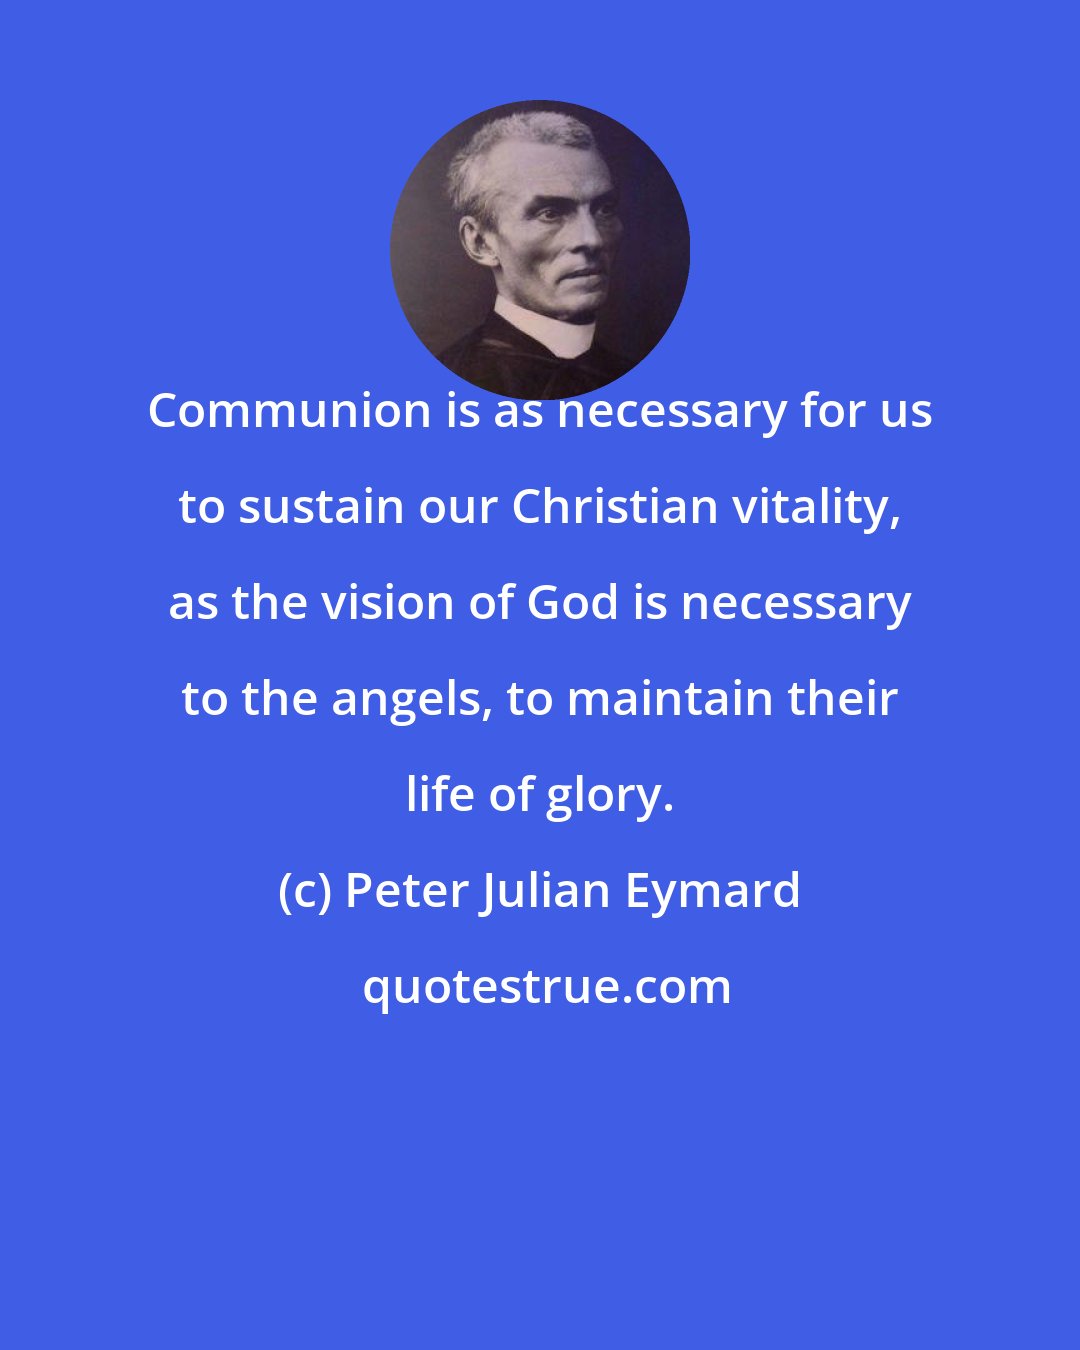 Peter Julian Eymard: Communion is as necessary for us to sustain our Christian vitality, as the vision of God is necessary to the angels, to maintain their life of glory.